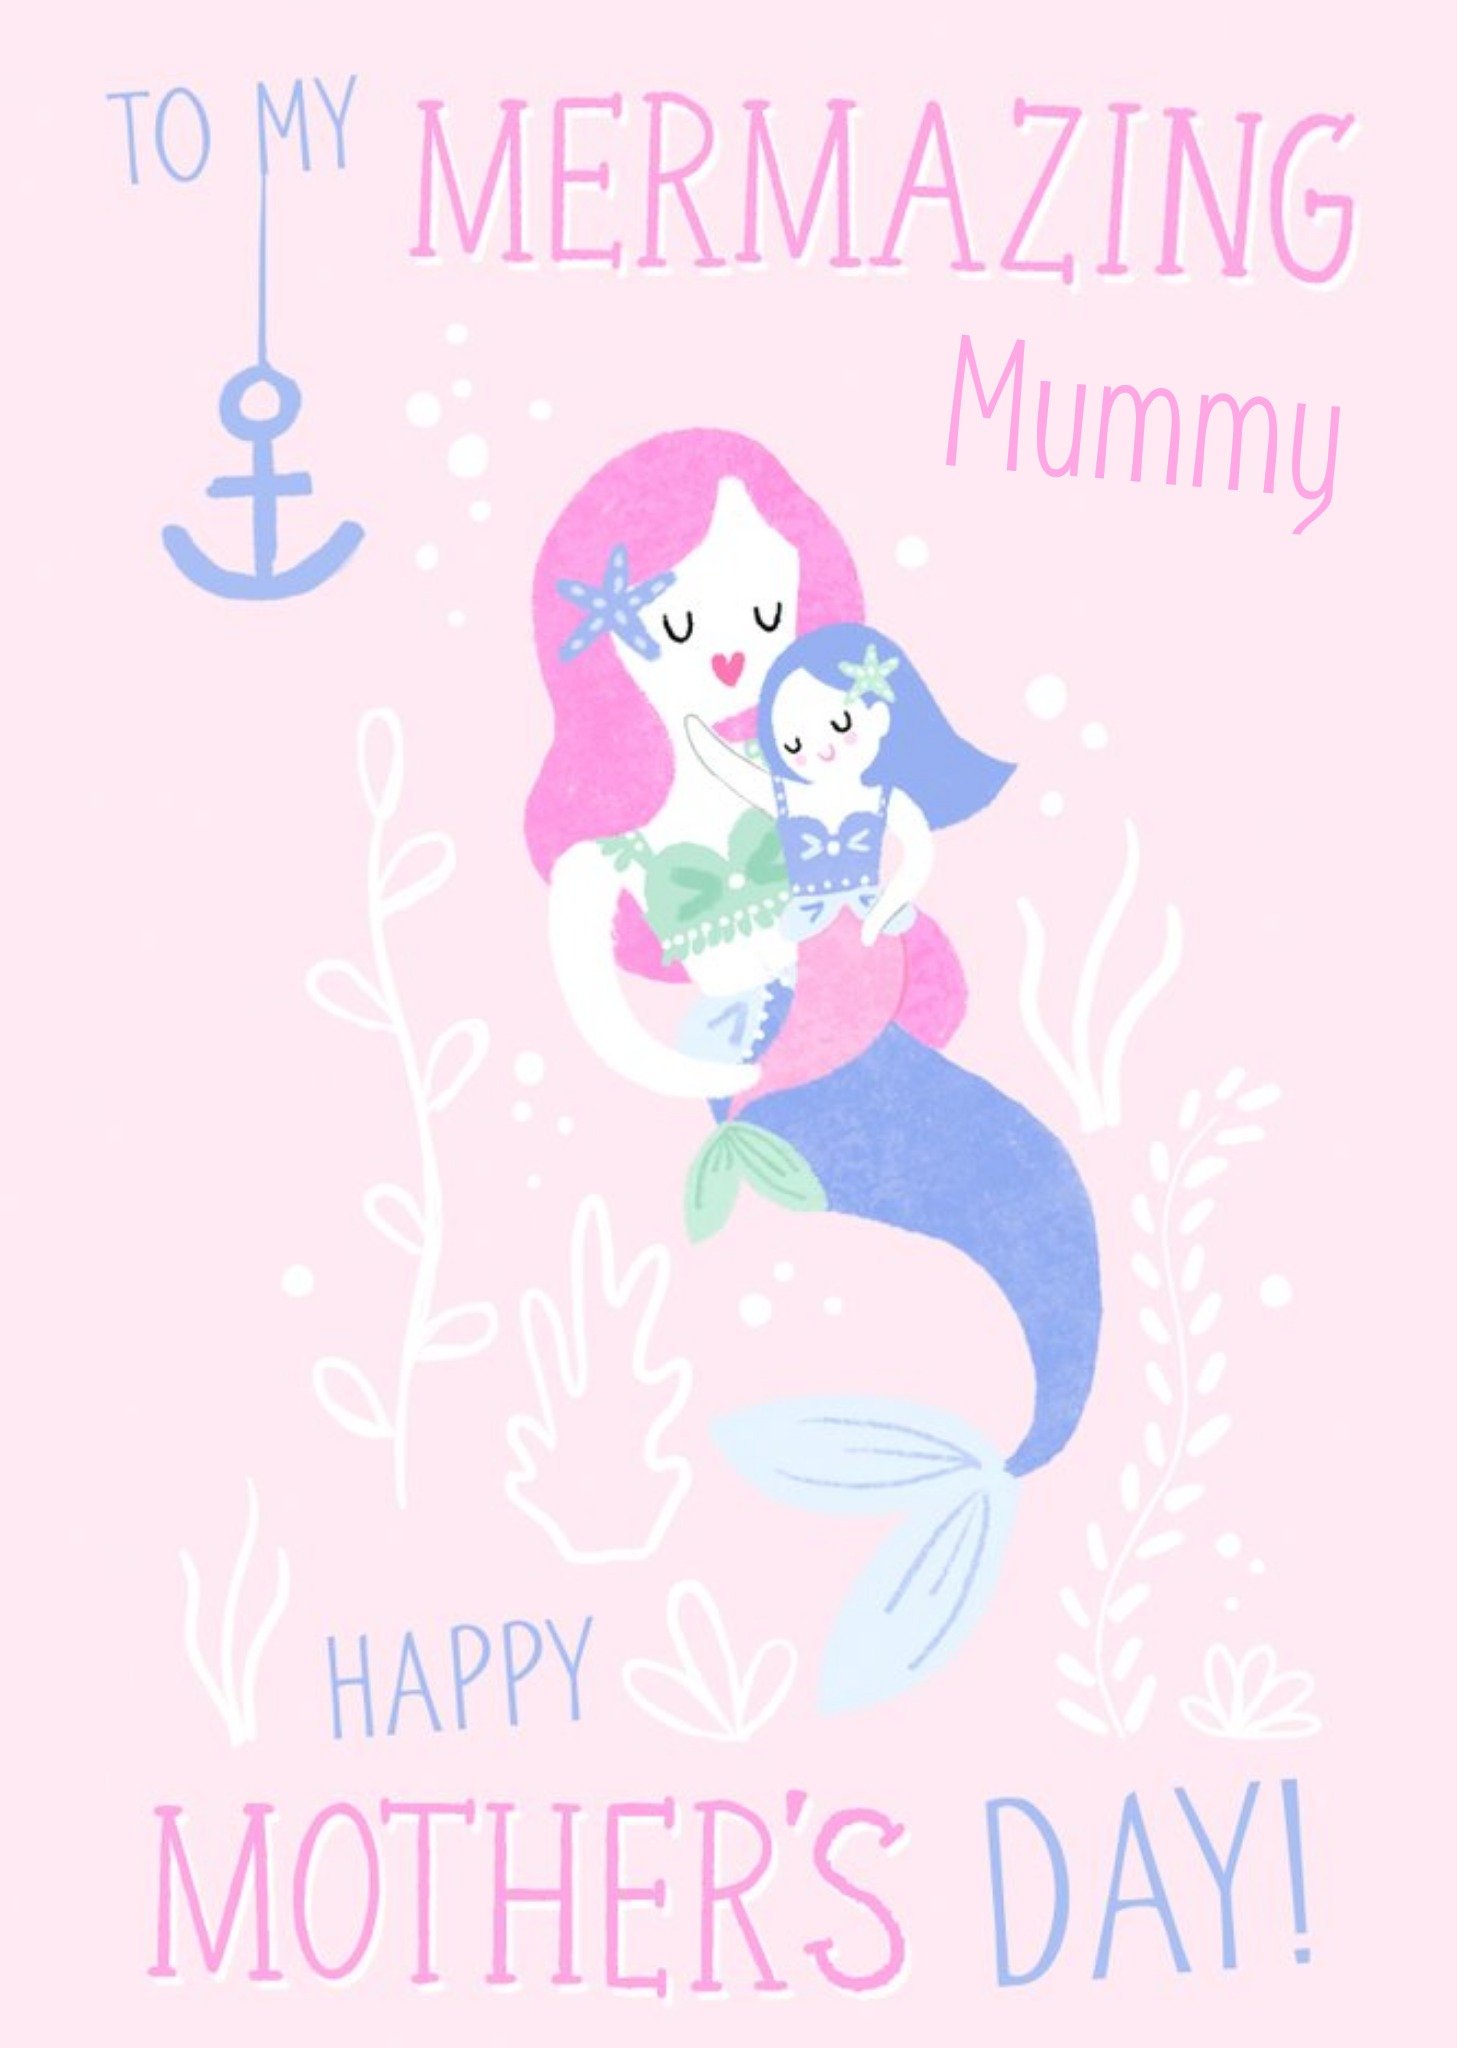 Moonpig Illustration Of A Mother And Daughter Mermaid Mermazing Mother's Day Card Ecard